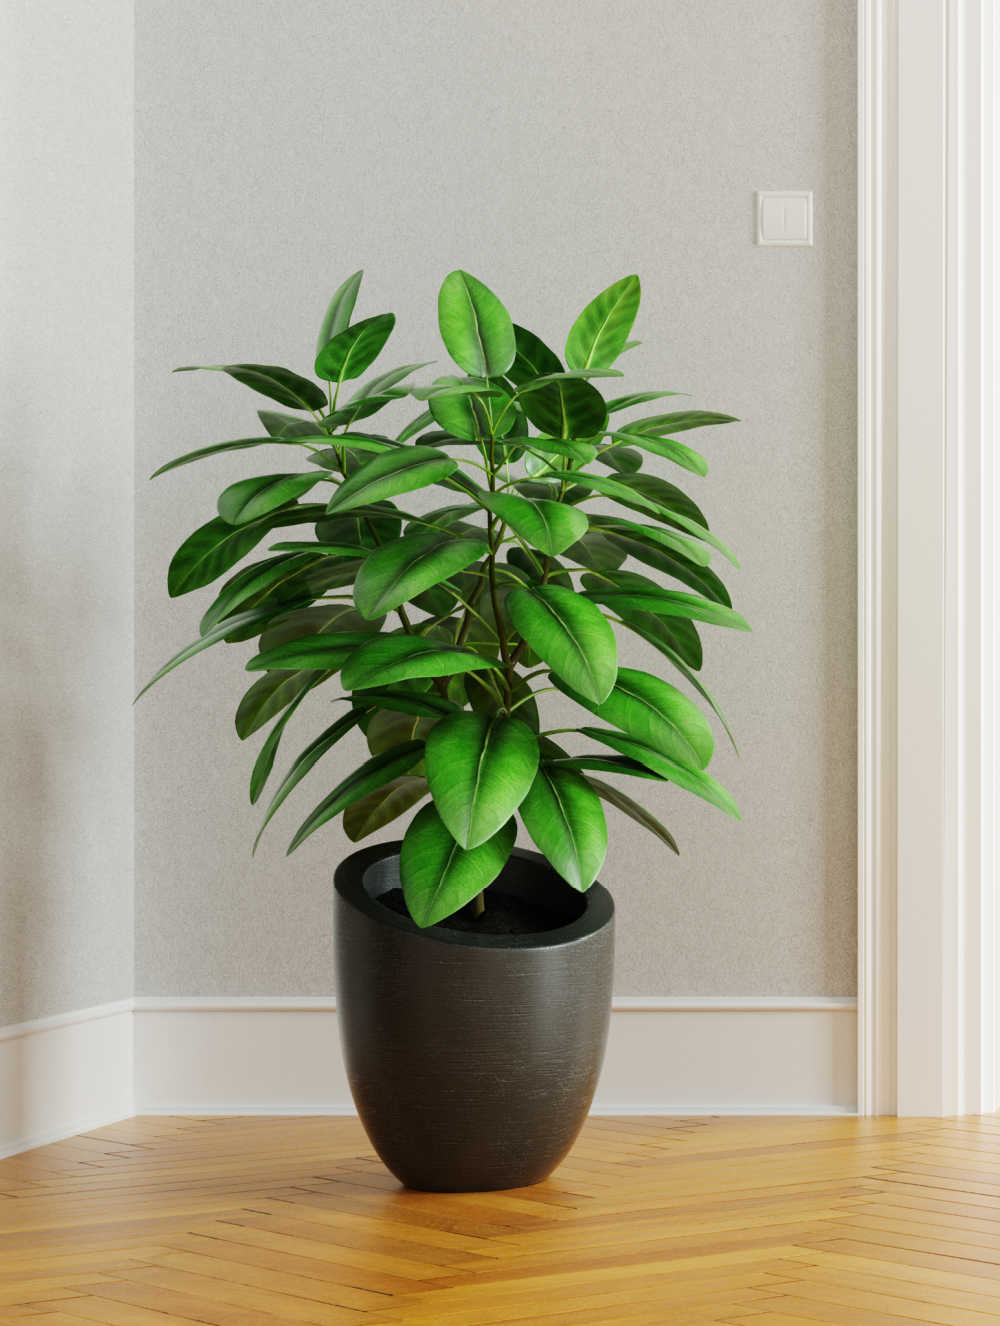 Another lucky plant - Rubber Plant in a brown pot in the corner of a room.